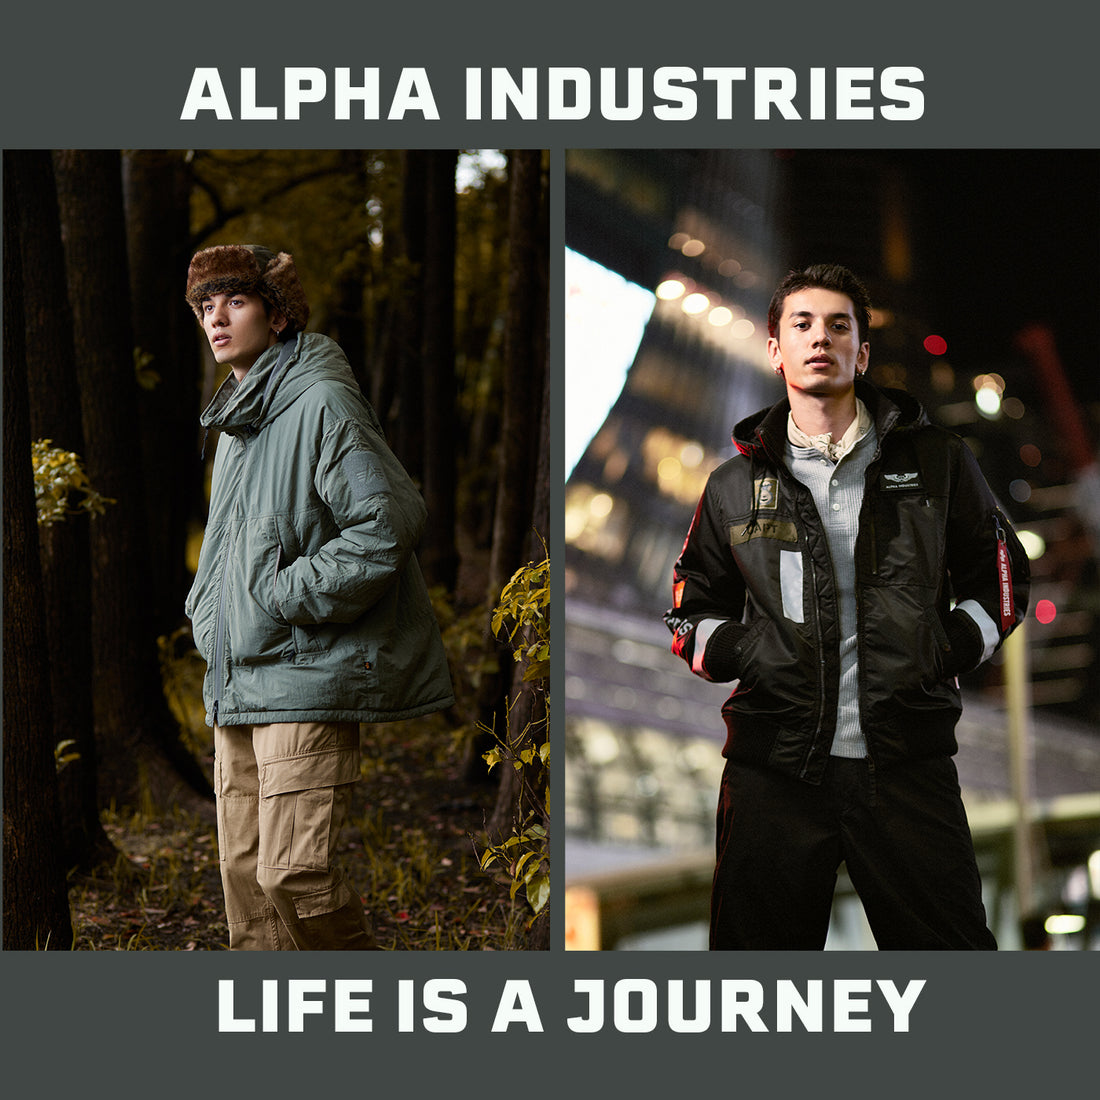 【ALPHA INDUSTRIES 】LIFE IS A JOURNEY